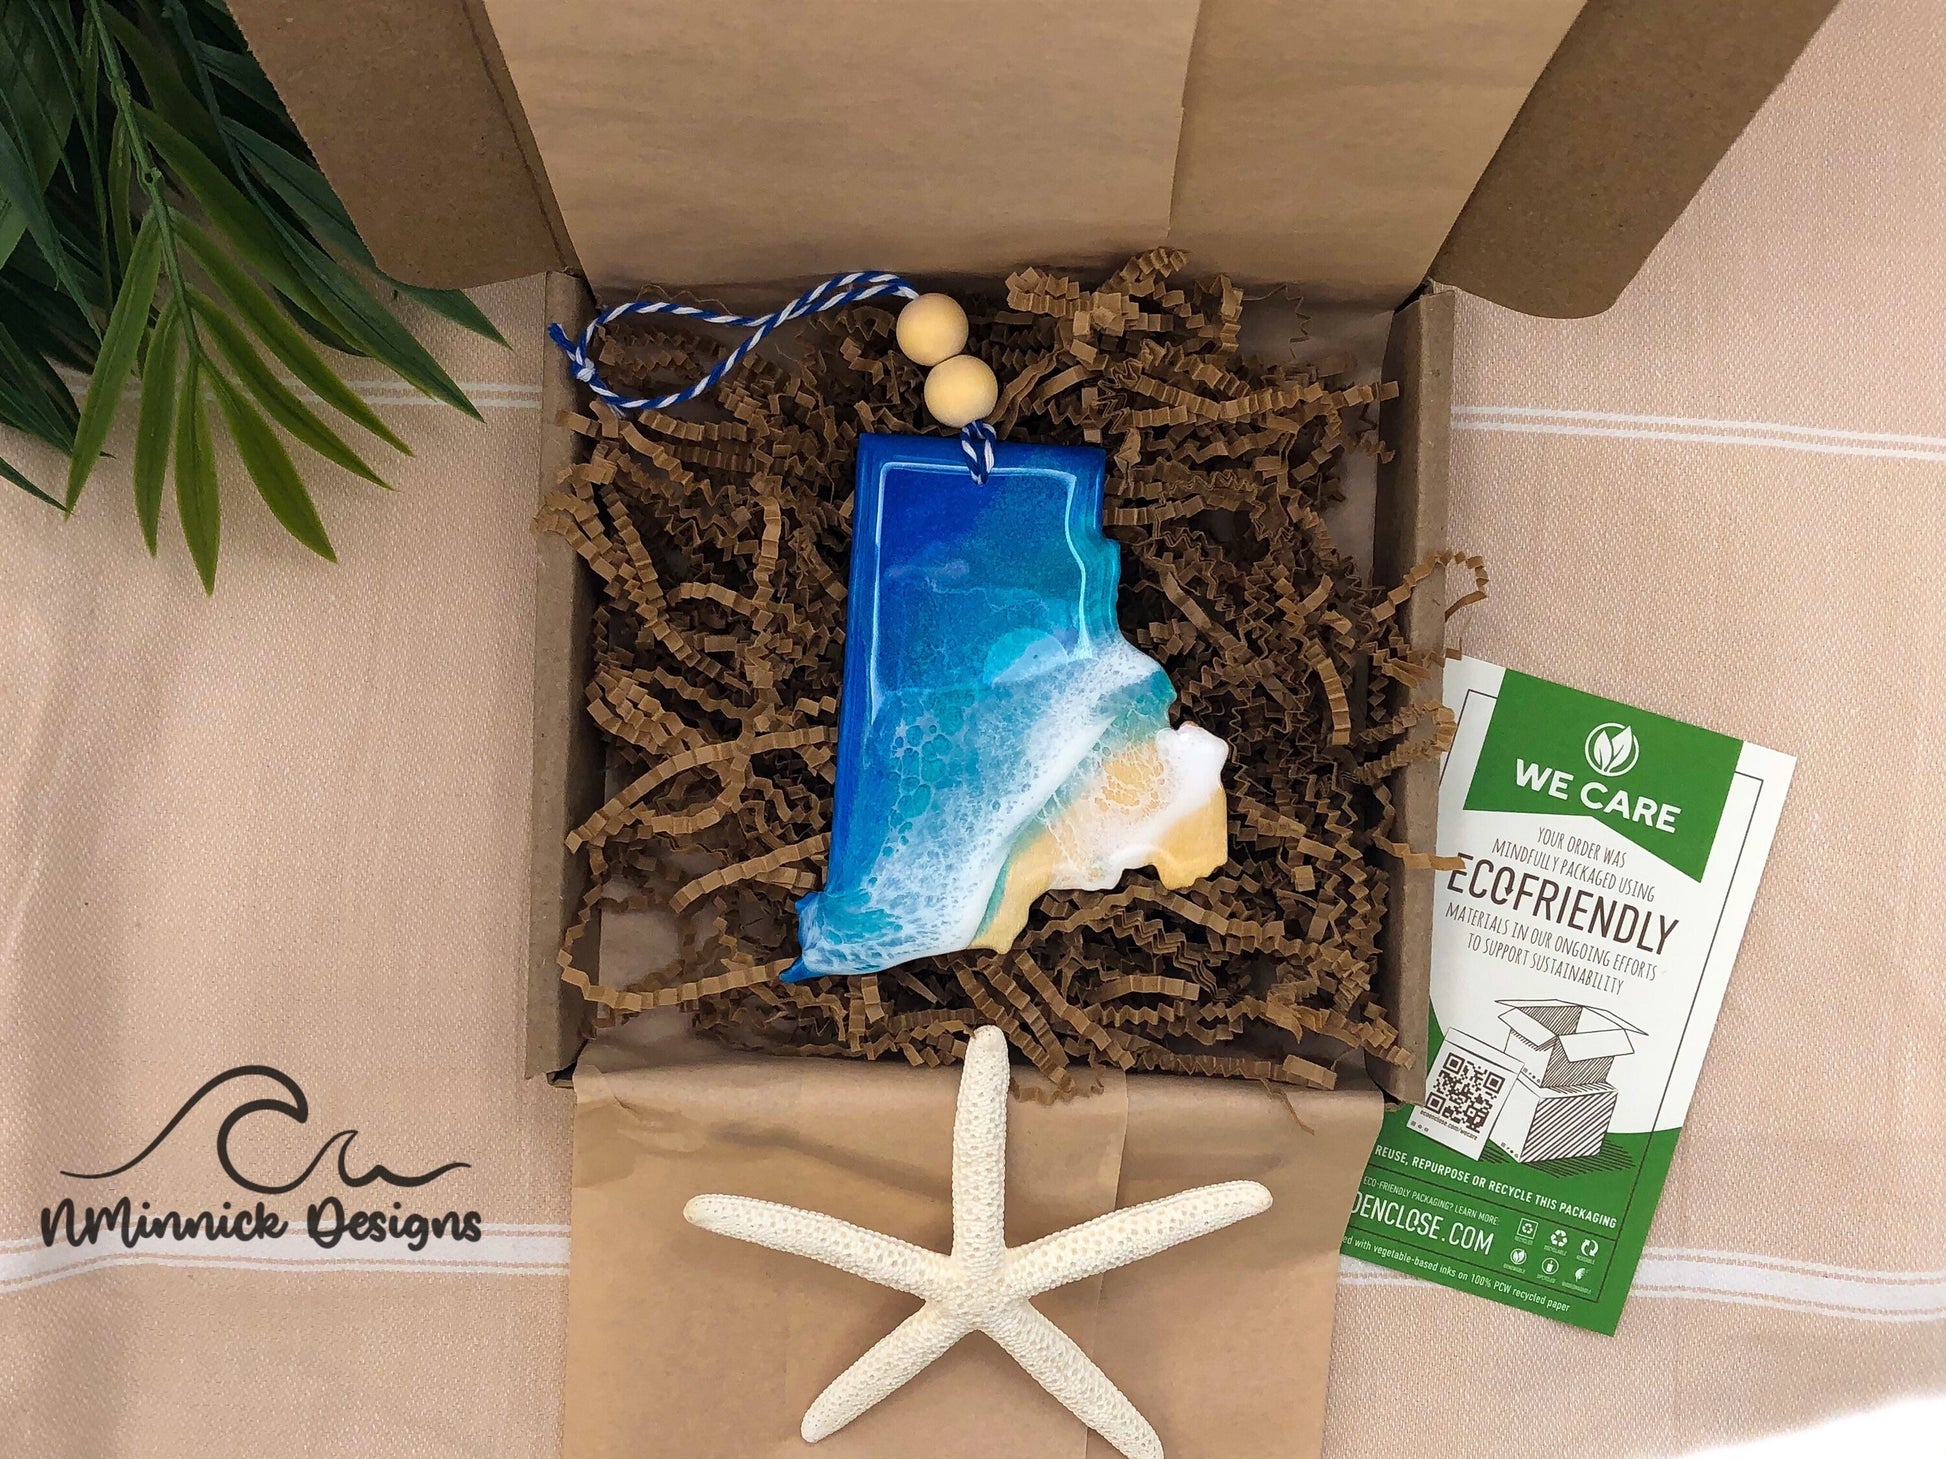 Rhode Island Ocean Resin Ornament packaged in ecofriendly plastic free materials with recyclable box, tissue paper and paper shred.